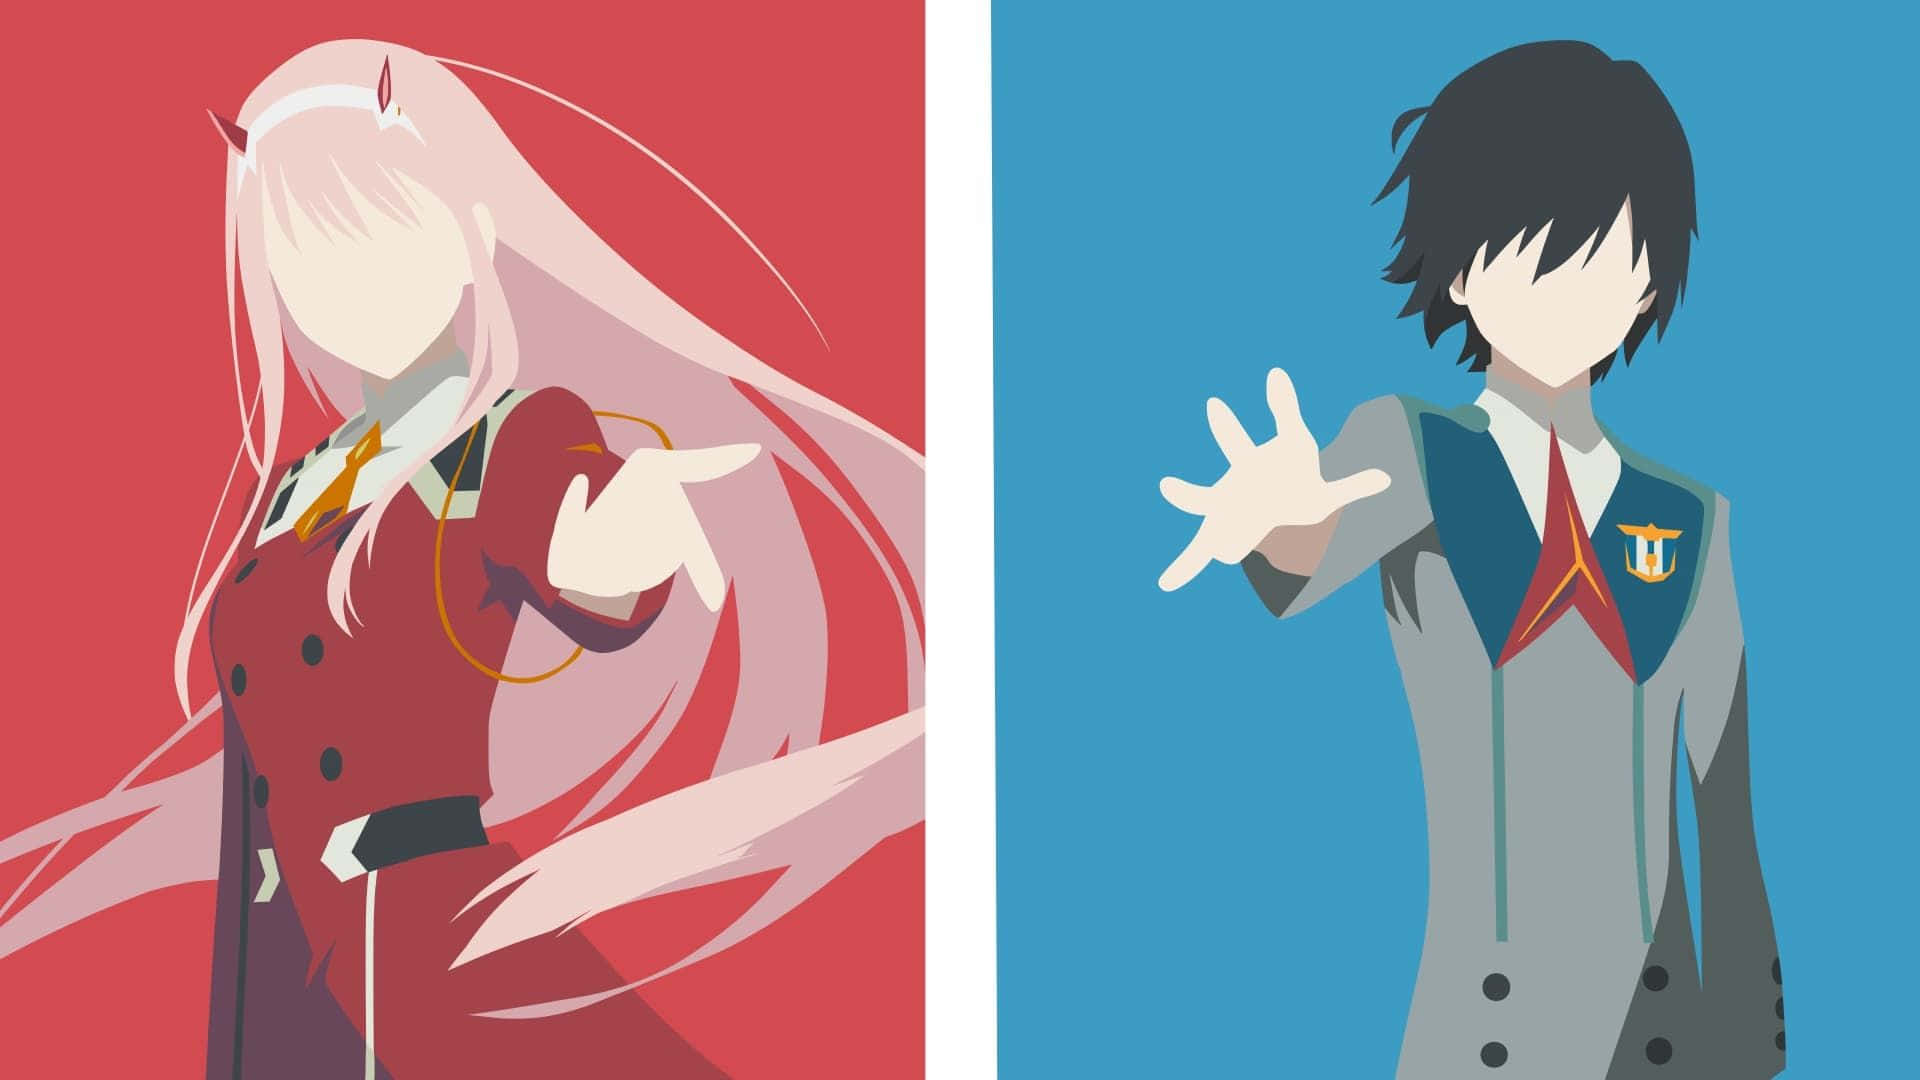 Get ready for adventure with Zero Two and Hiro from Darling In The Franxx